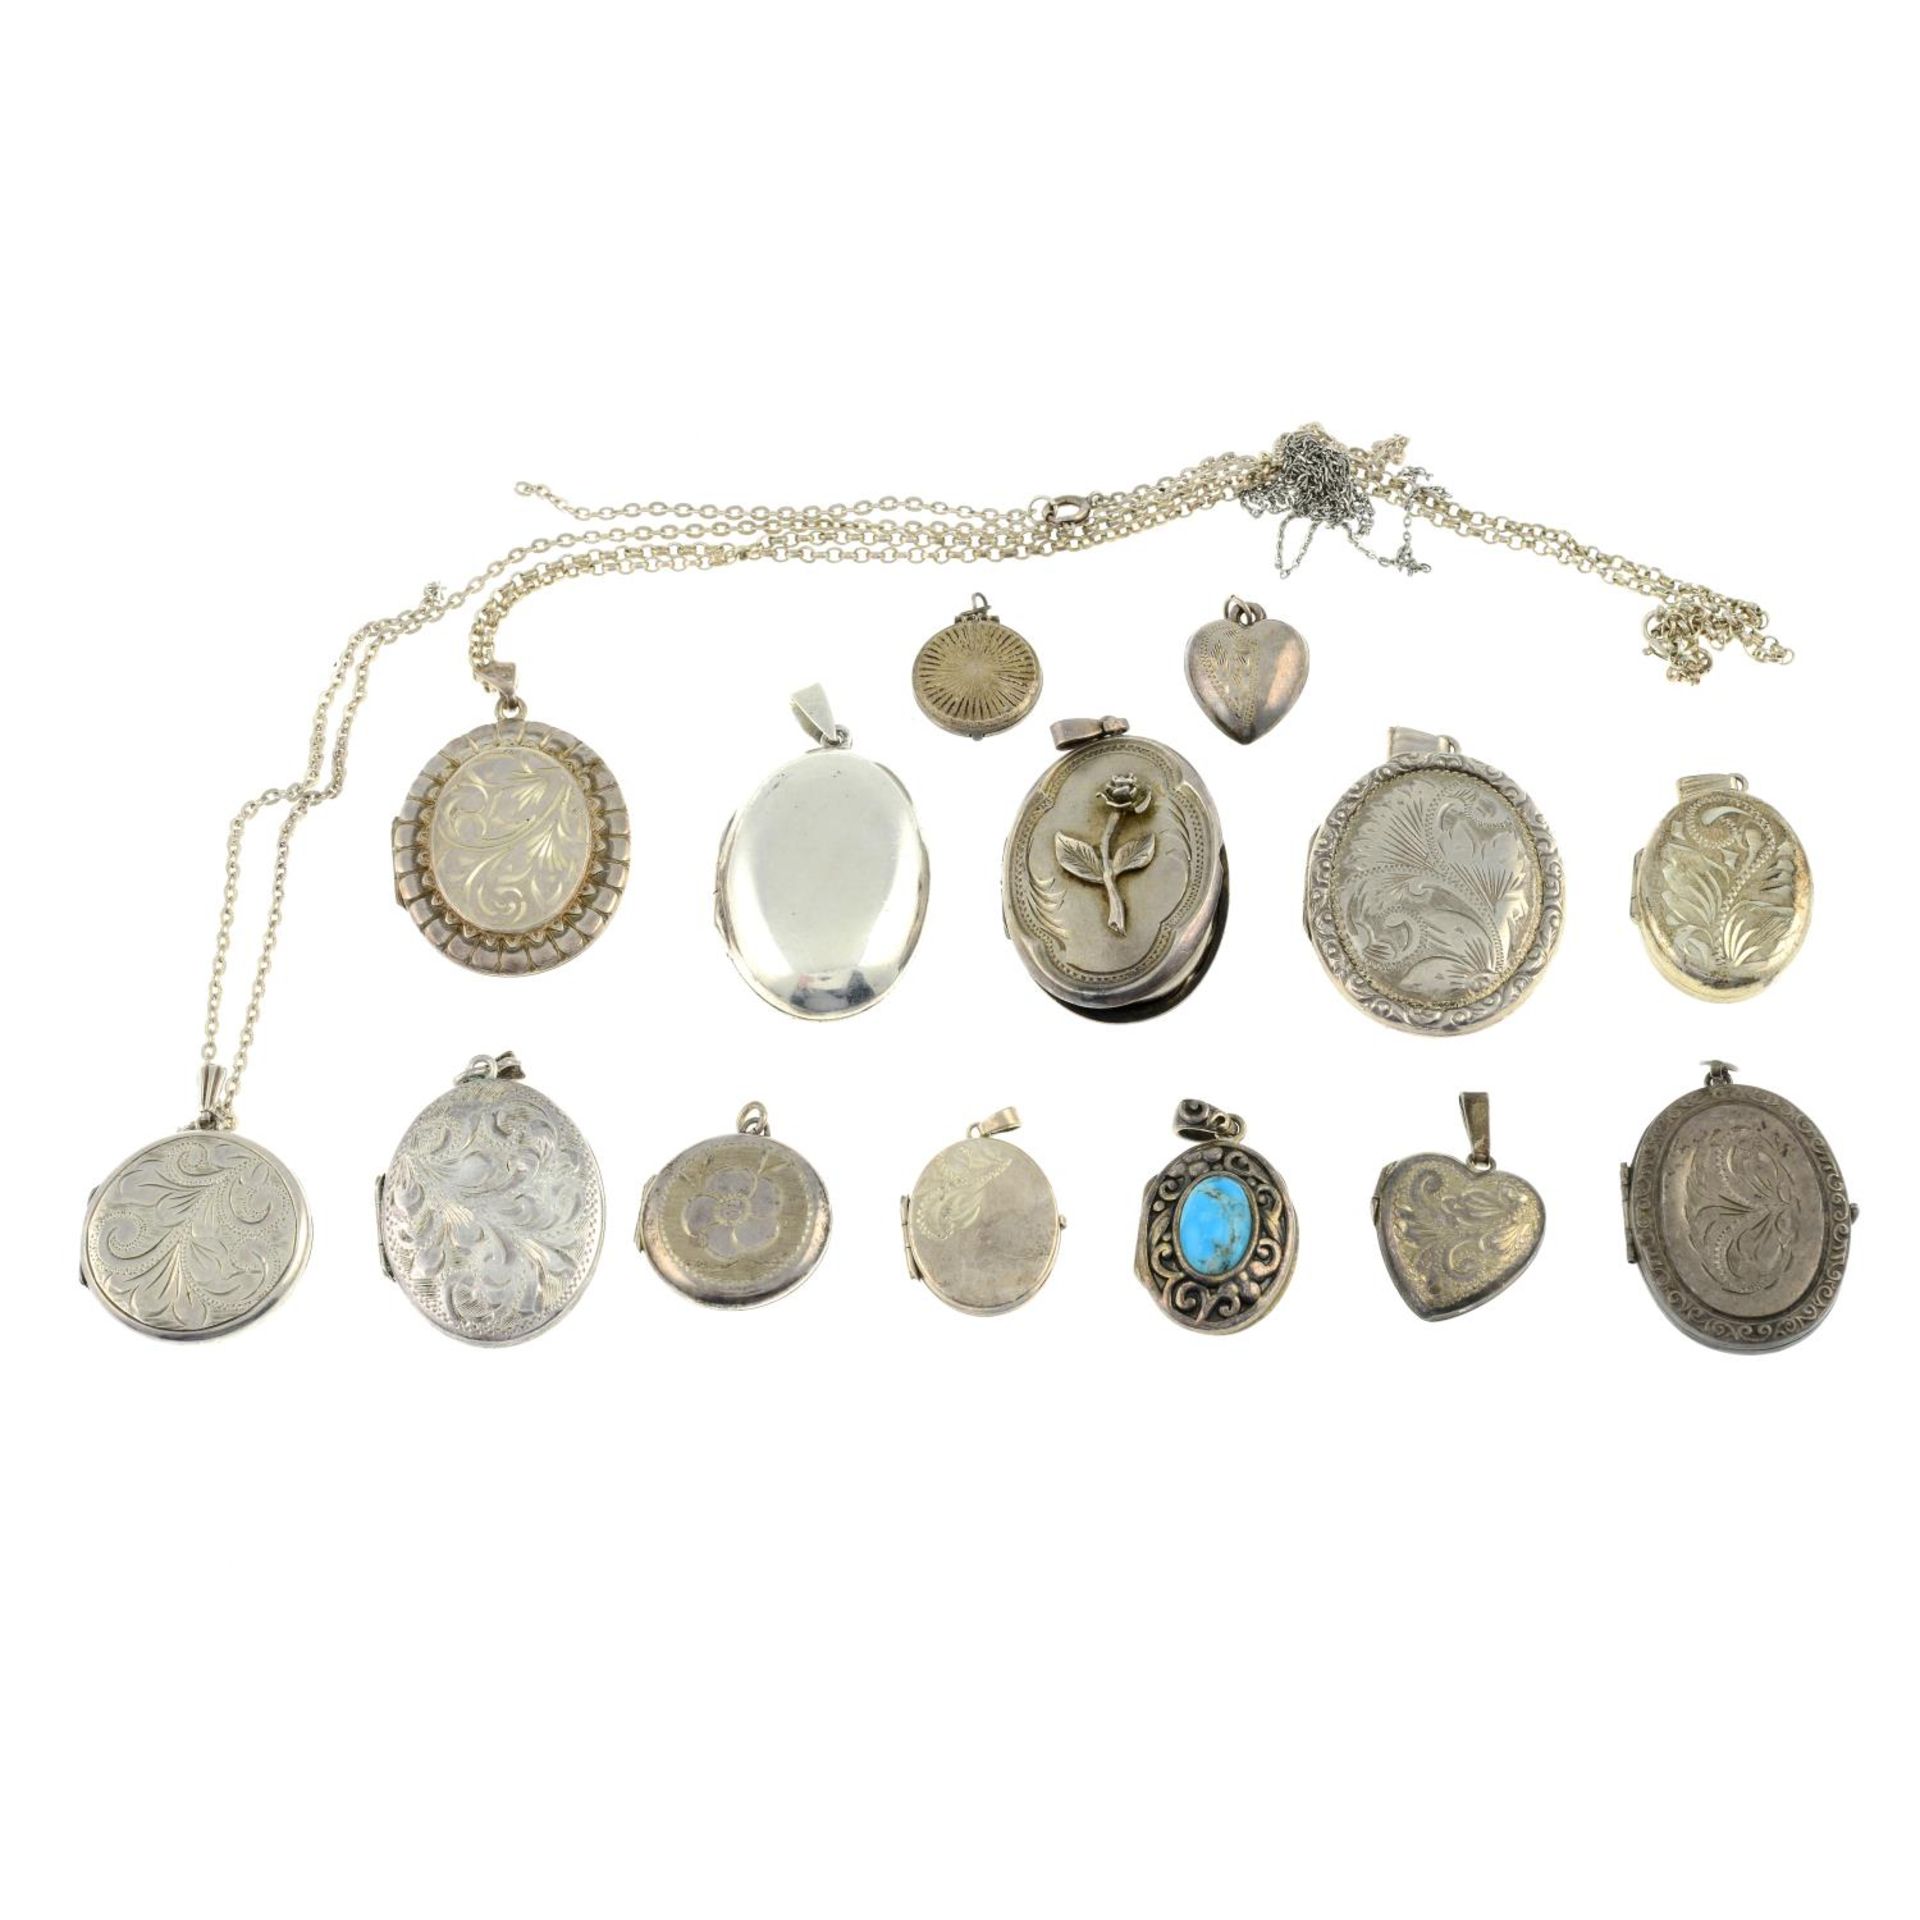 A selection of lockets. - Image 2 of 2